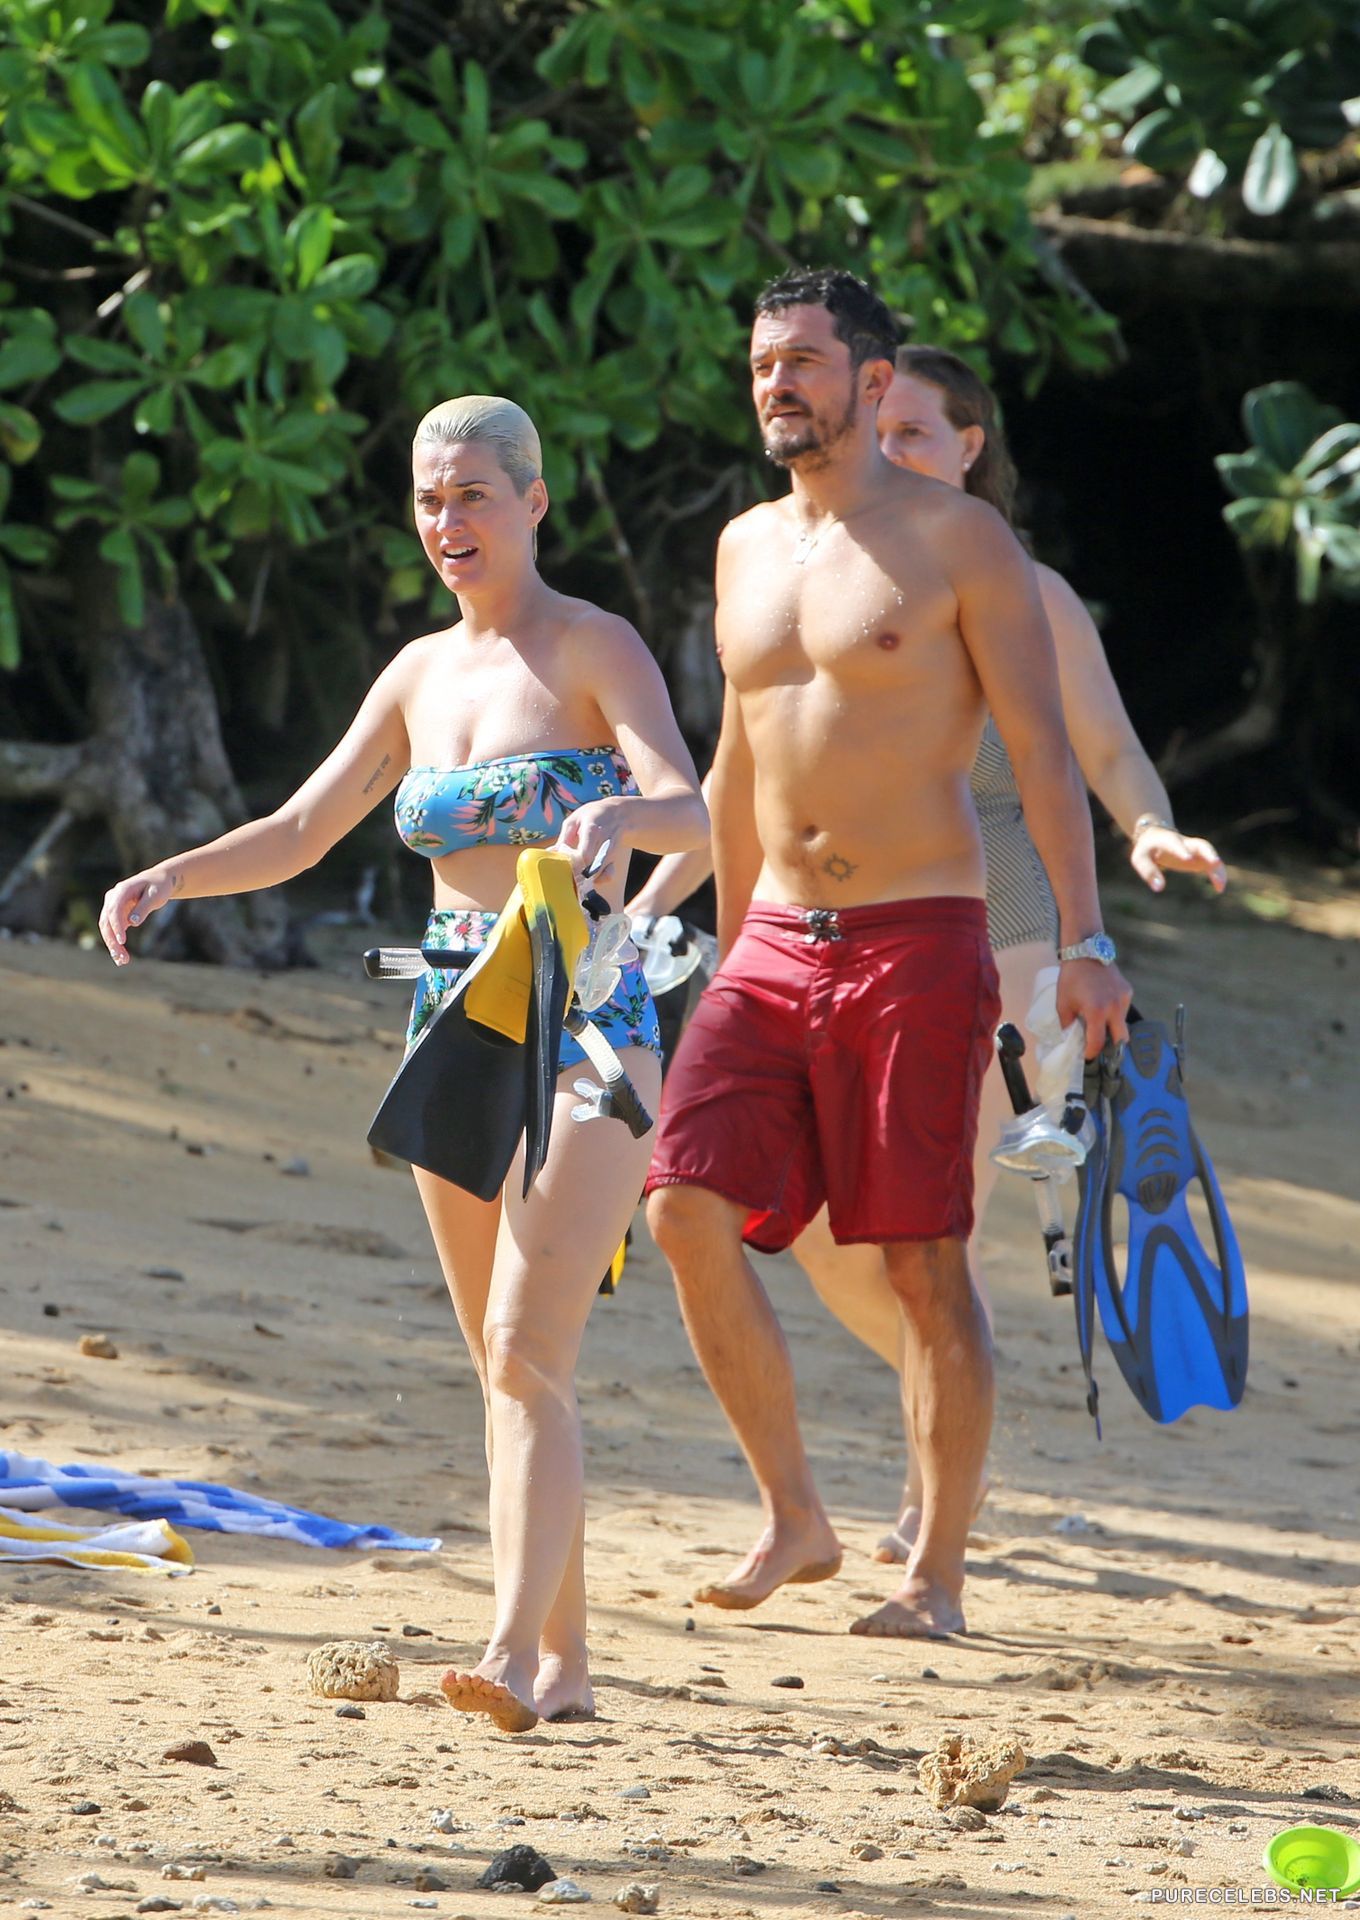 BOKISSONTHRONE NEWS: Orlando Bloom nude on vacation with 